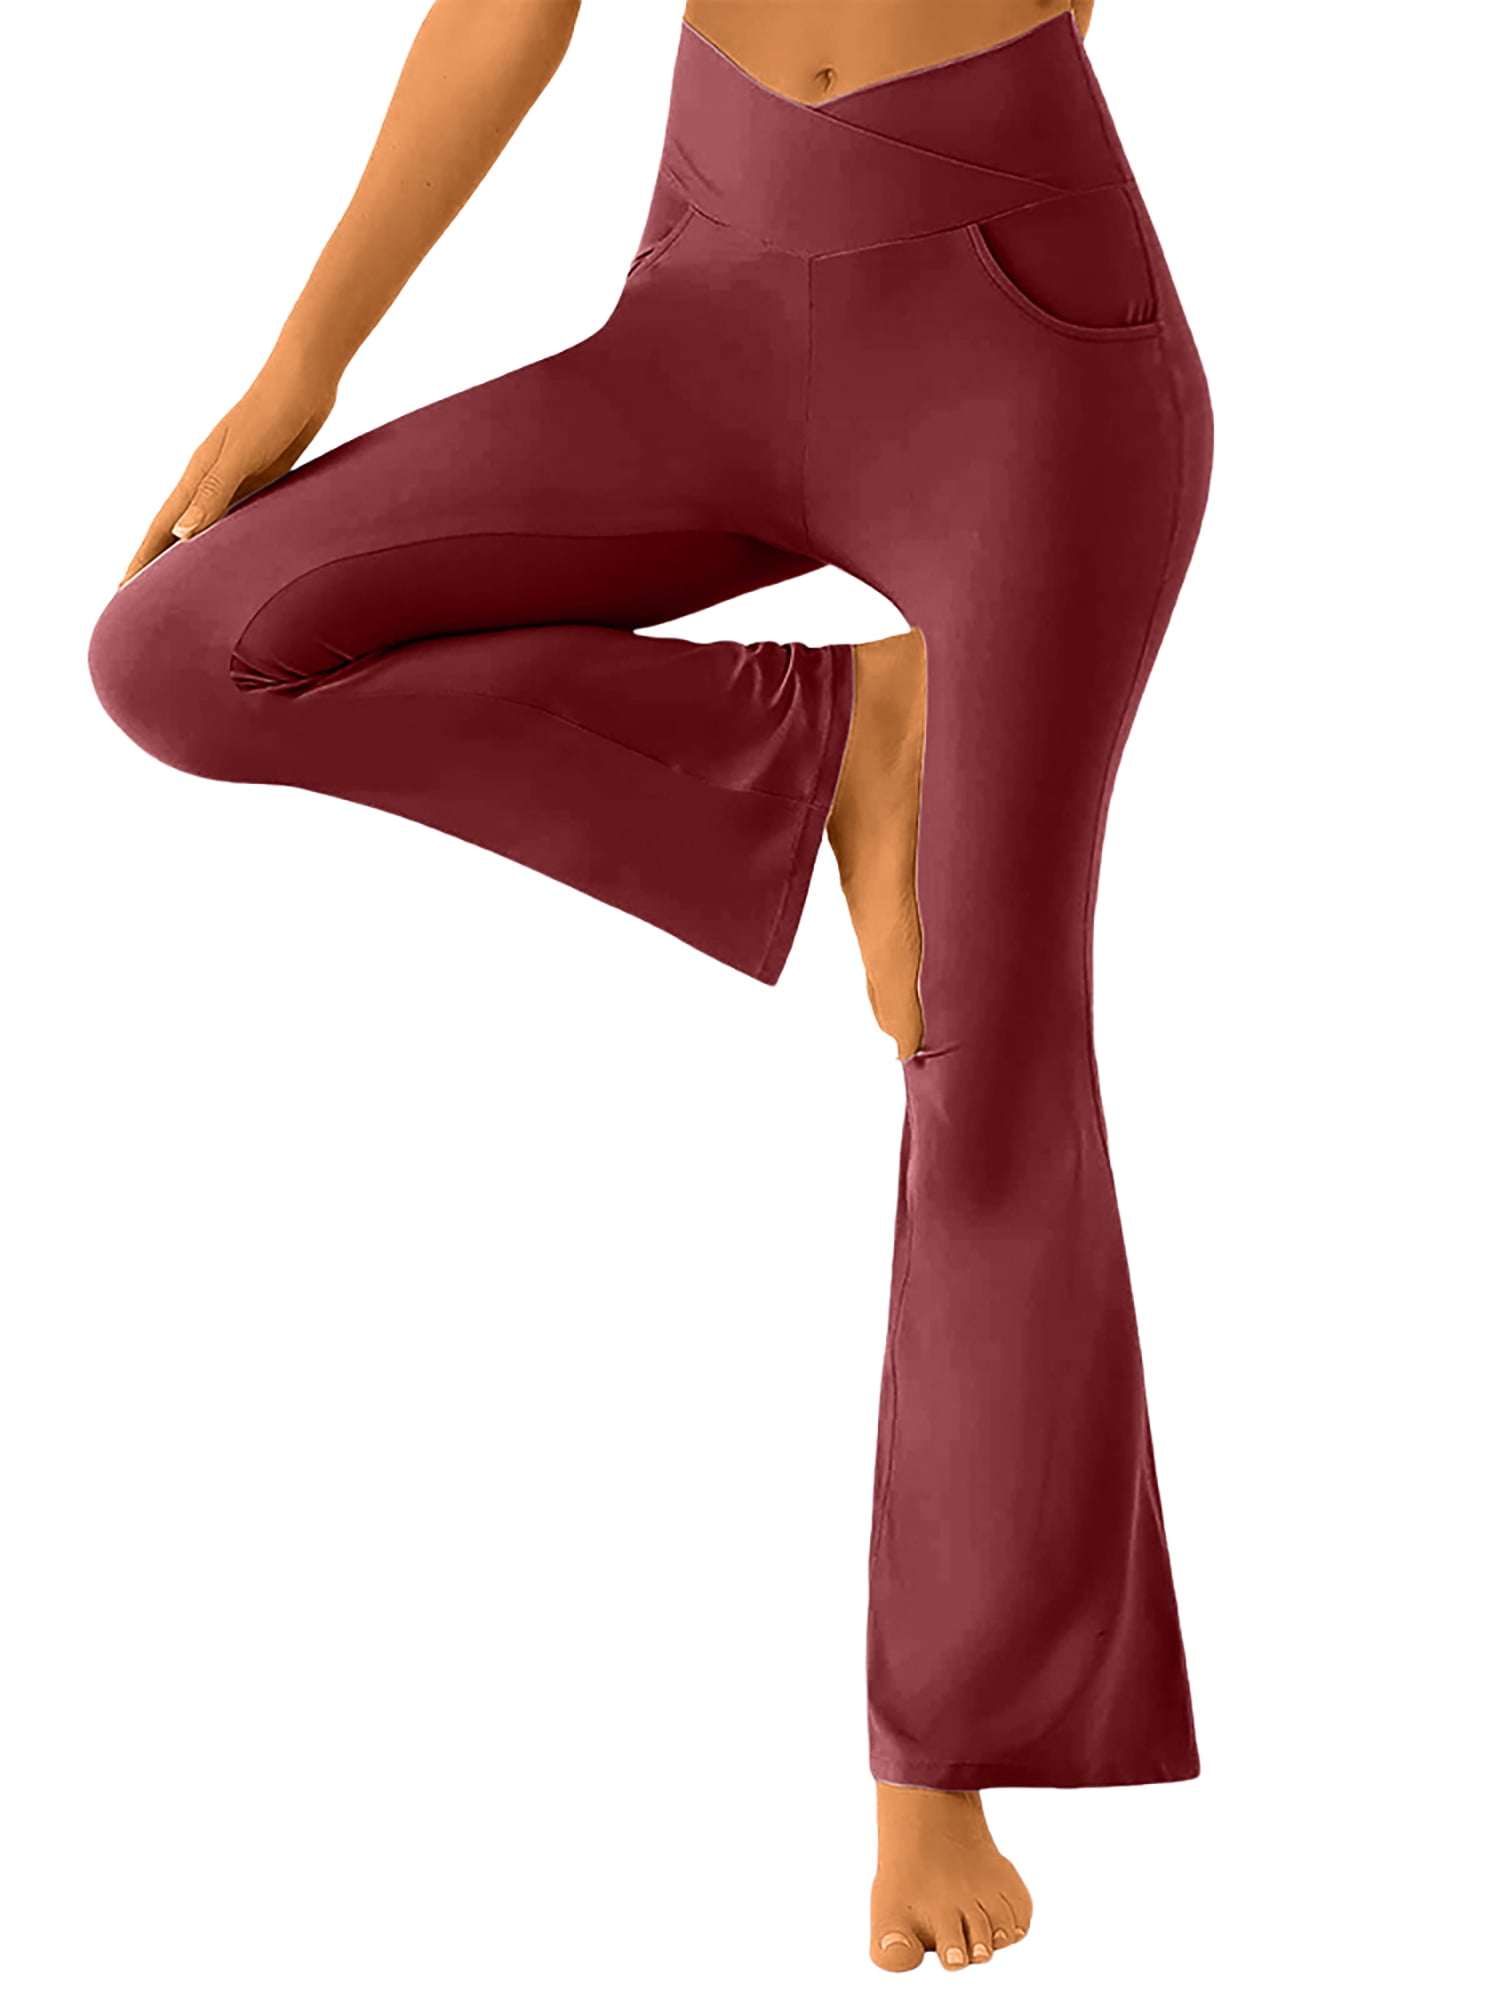 Buy IUGA Bootcut Yoga Pants for Women with Pockets High Waisted Workout  Pants Tummy Control Bootleg Work Pants for Women (Maroon, Medium) at